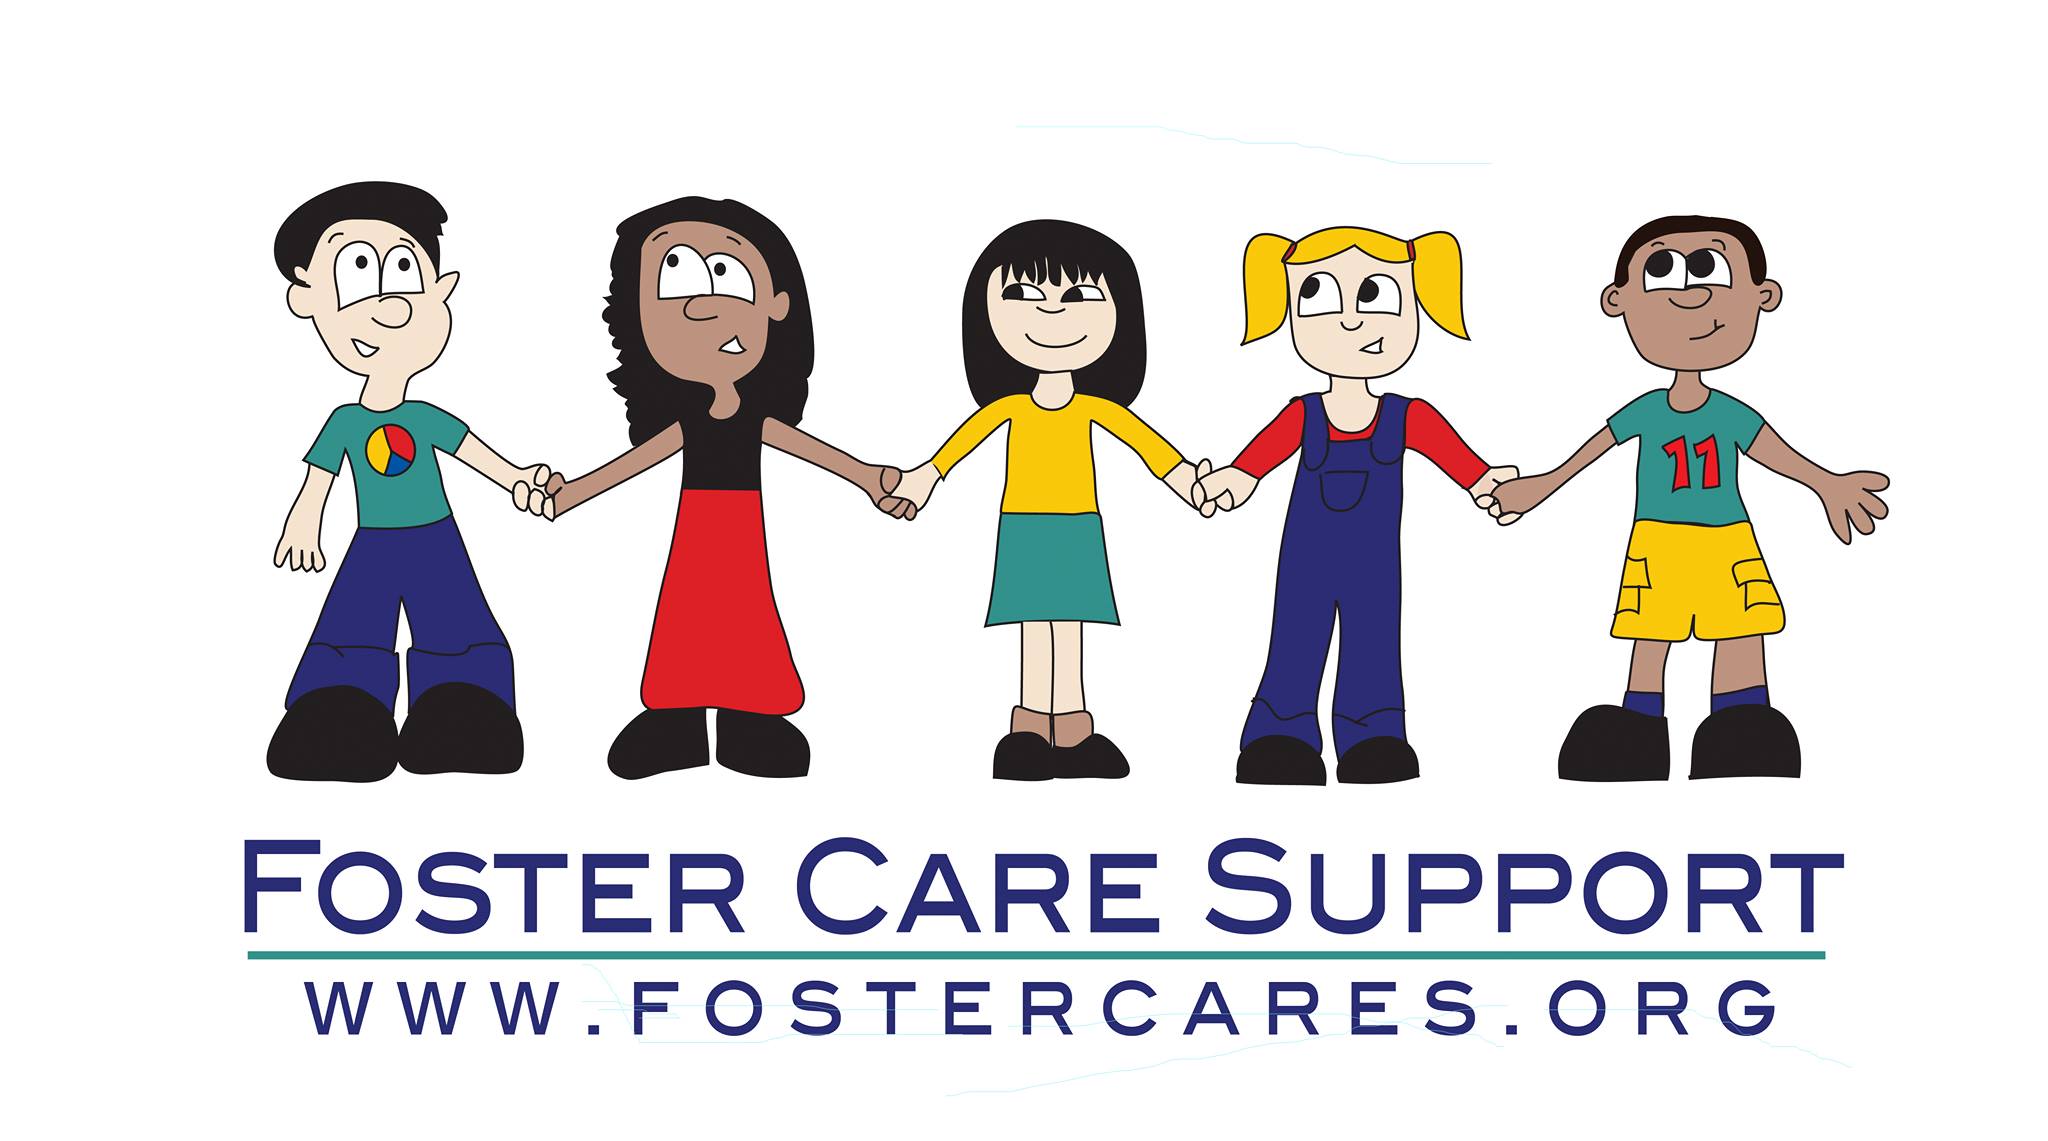 Foster care support logo